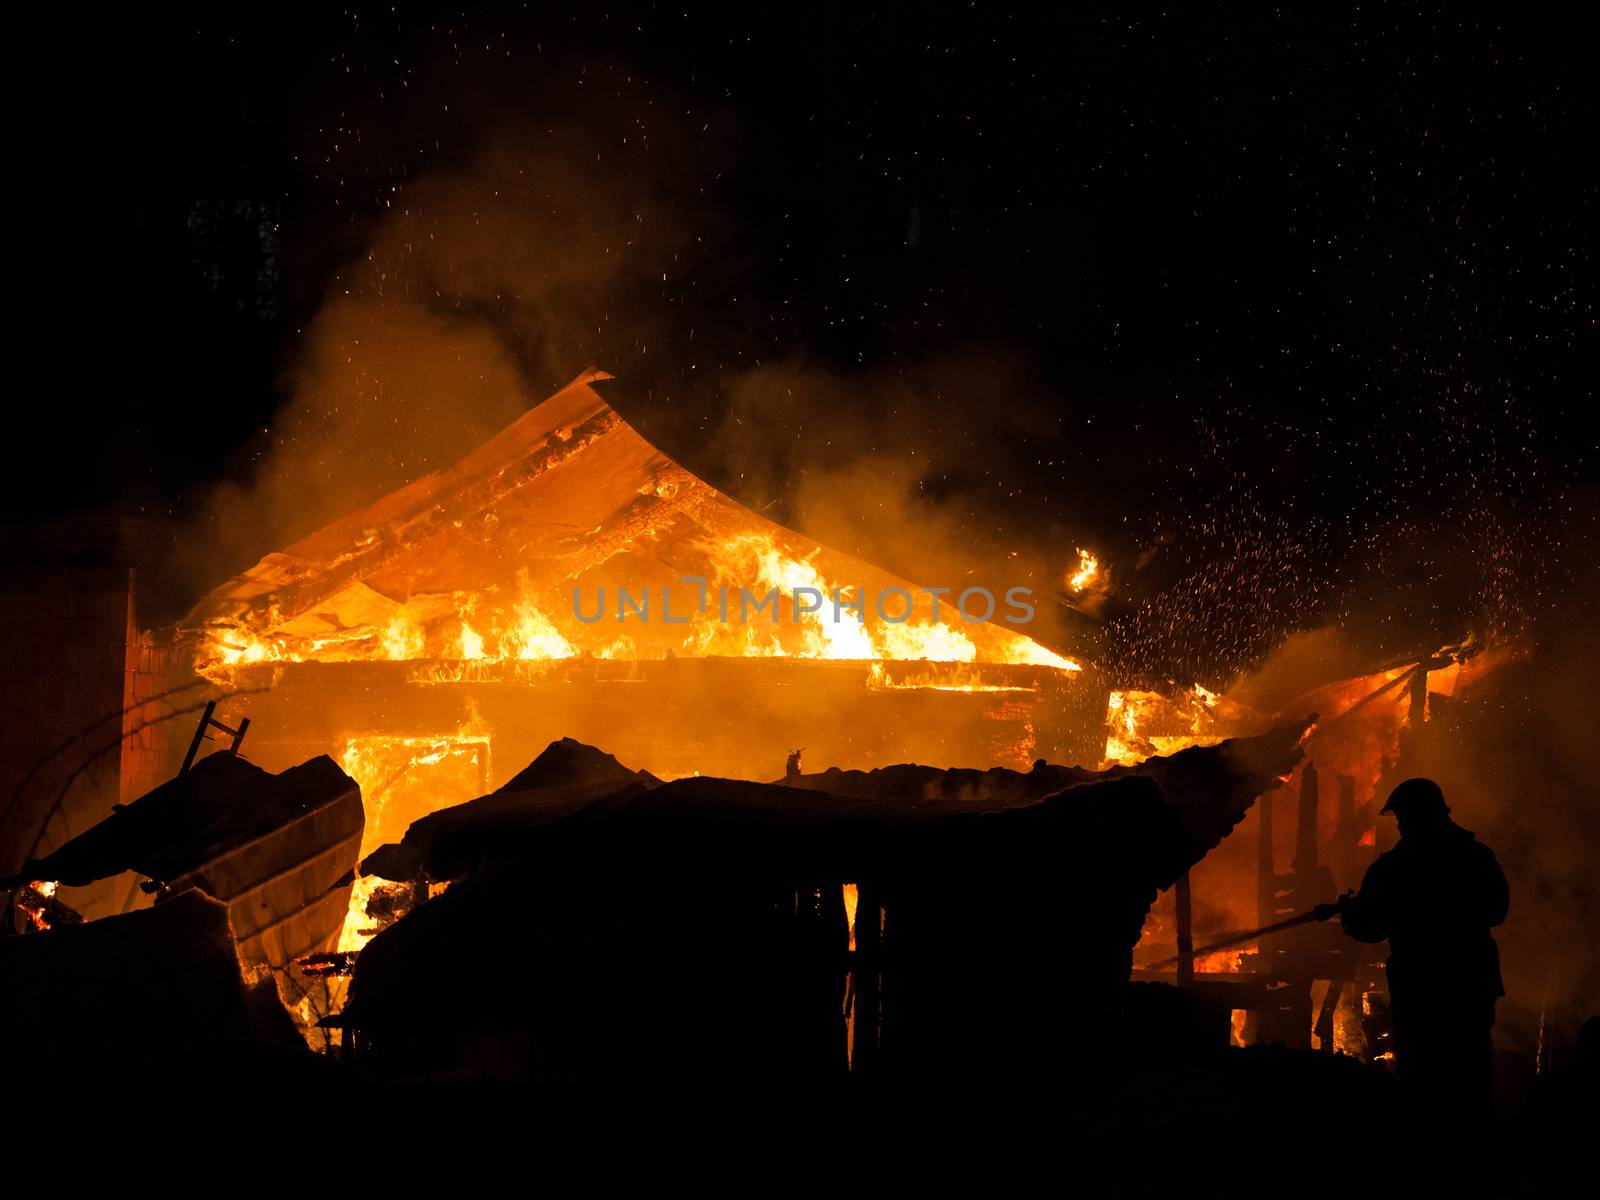 Arson or nature disaster - firefighter at burning fire flame on wooden house roof